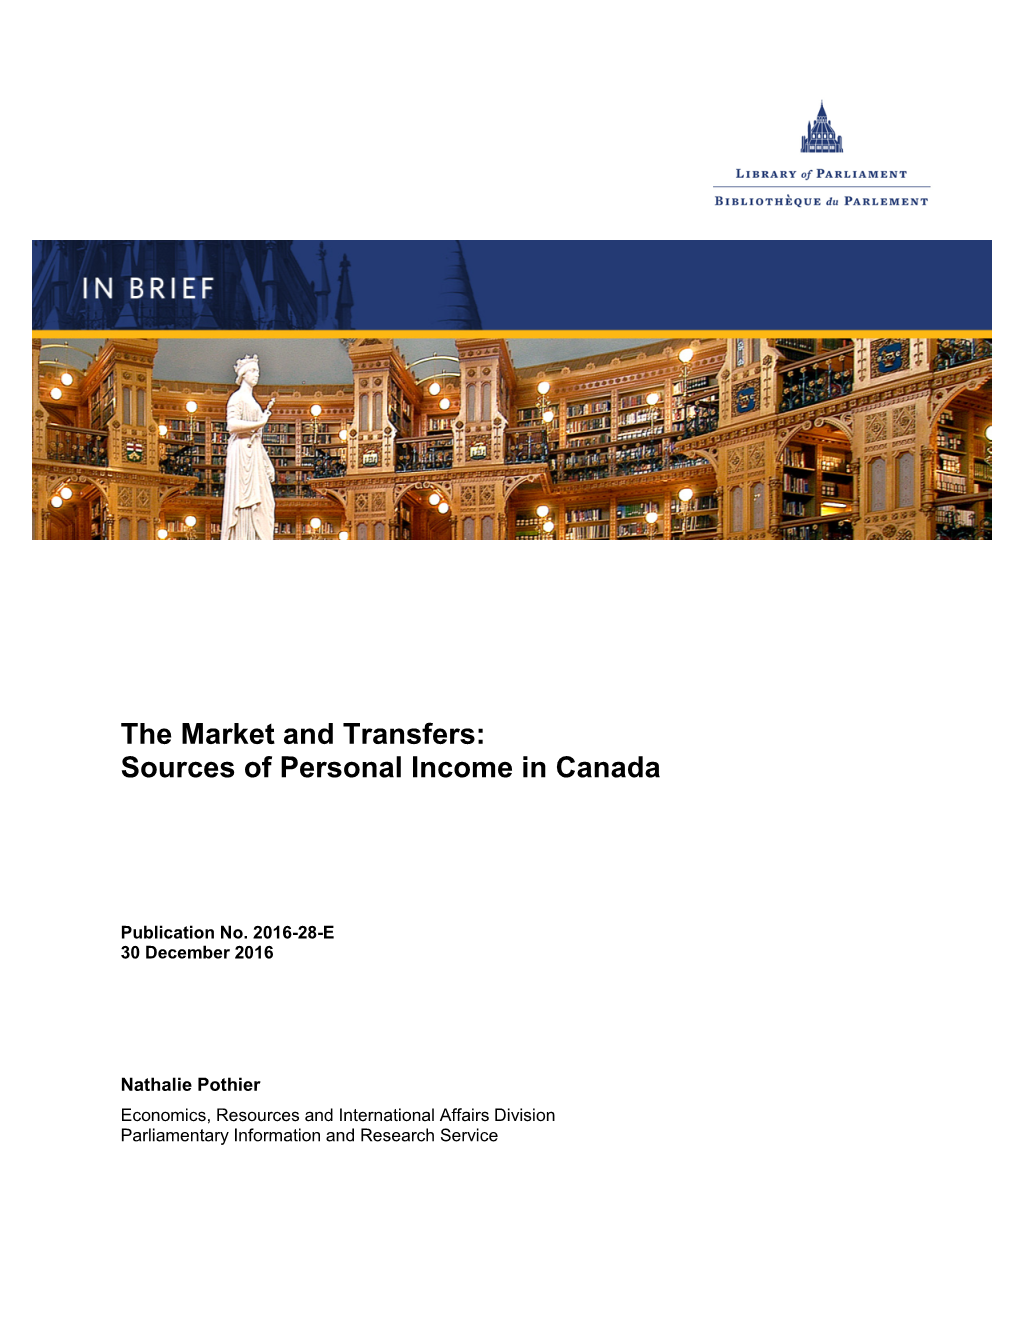 The Market and Transfers: Sources of Personal Income in Canada